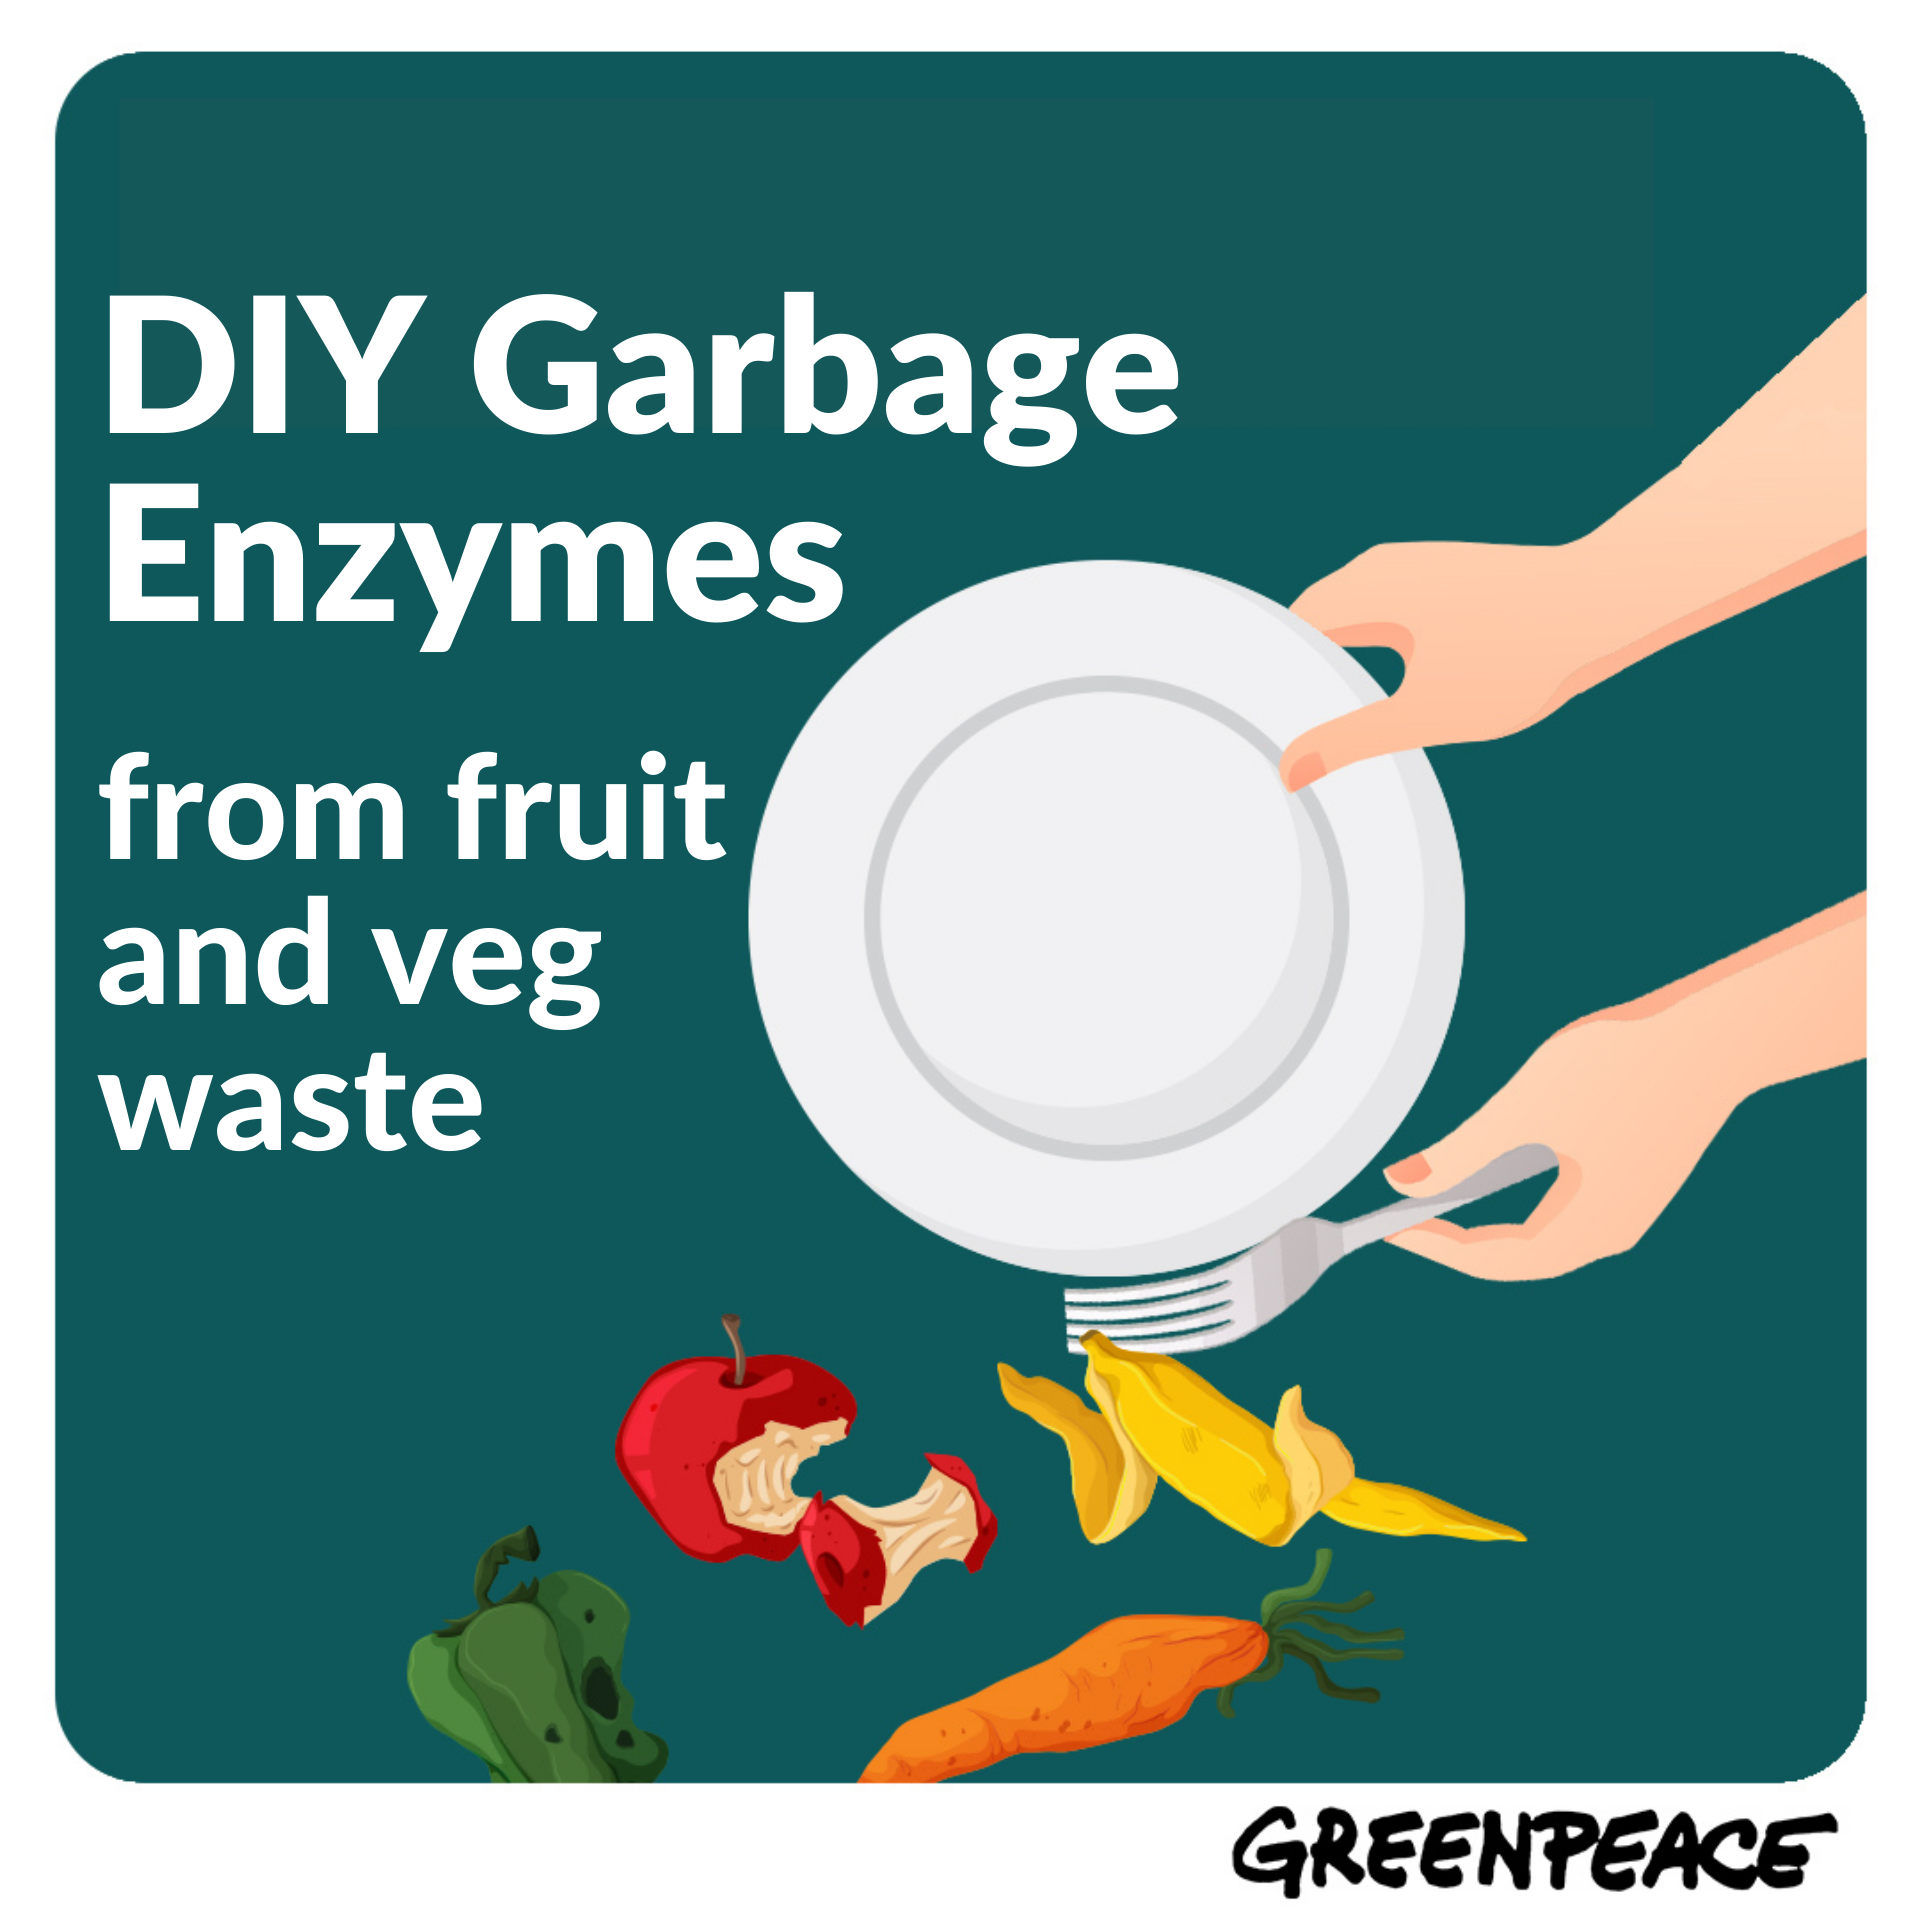 DIY Garbage Enzymes: Learn a new skill during the MCO ...